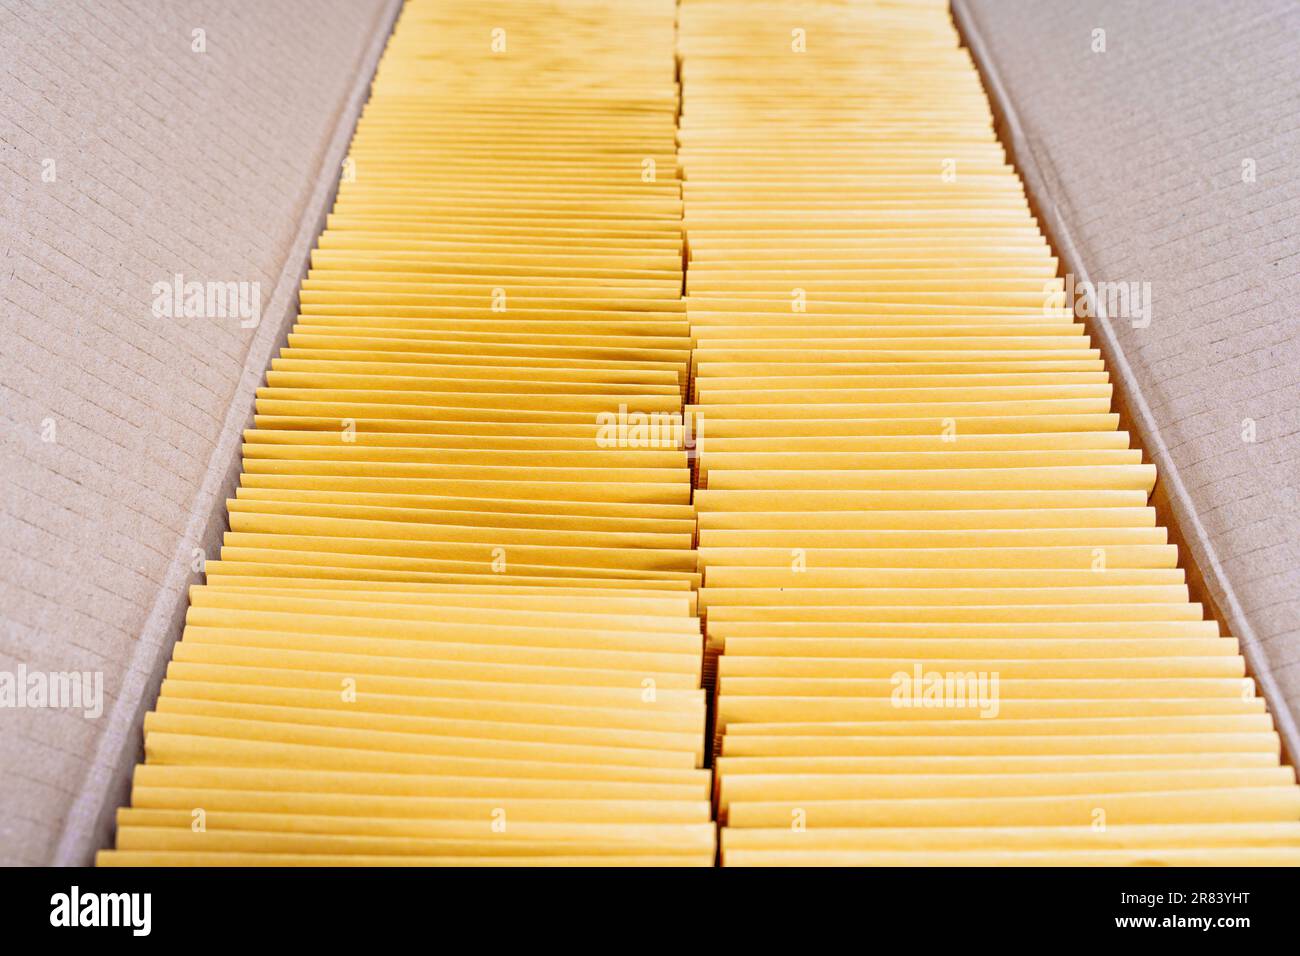 Close-up of a rectangular cardboard box filled with two stacks of yellow padded envelopes neatly packed inside. Stock Photo